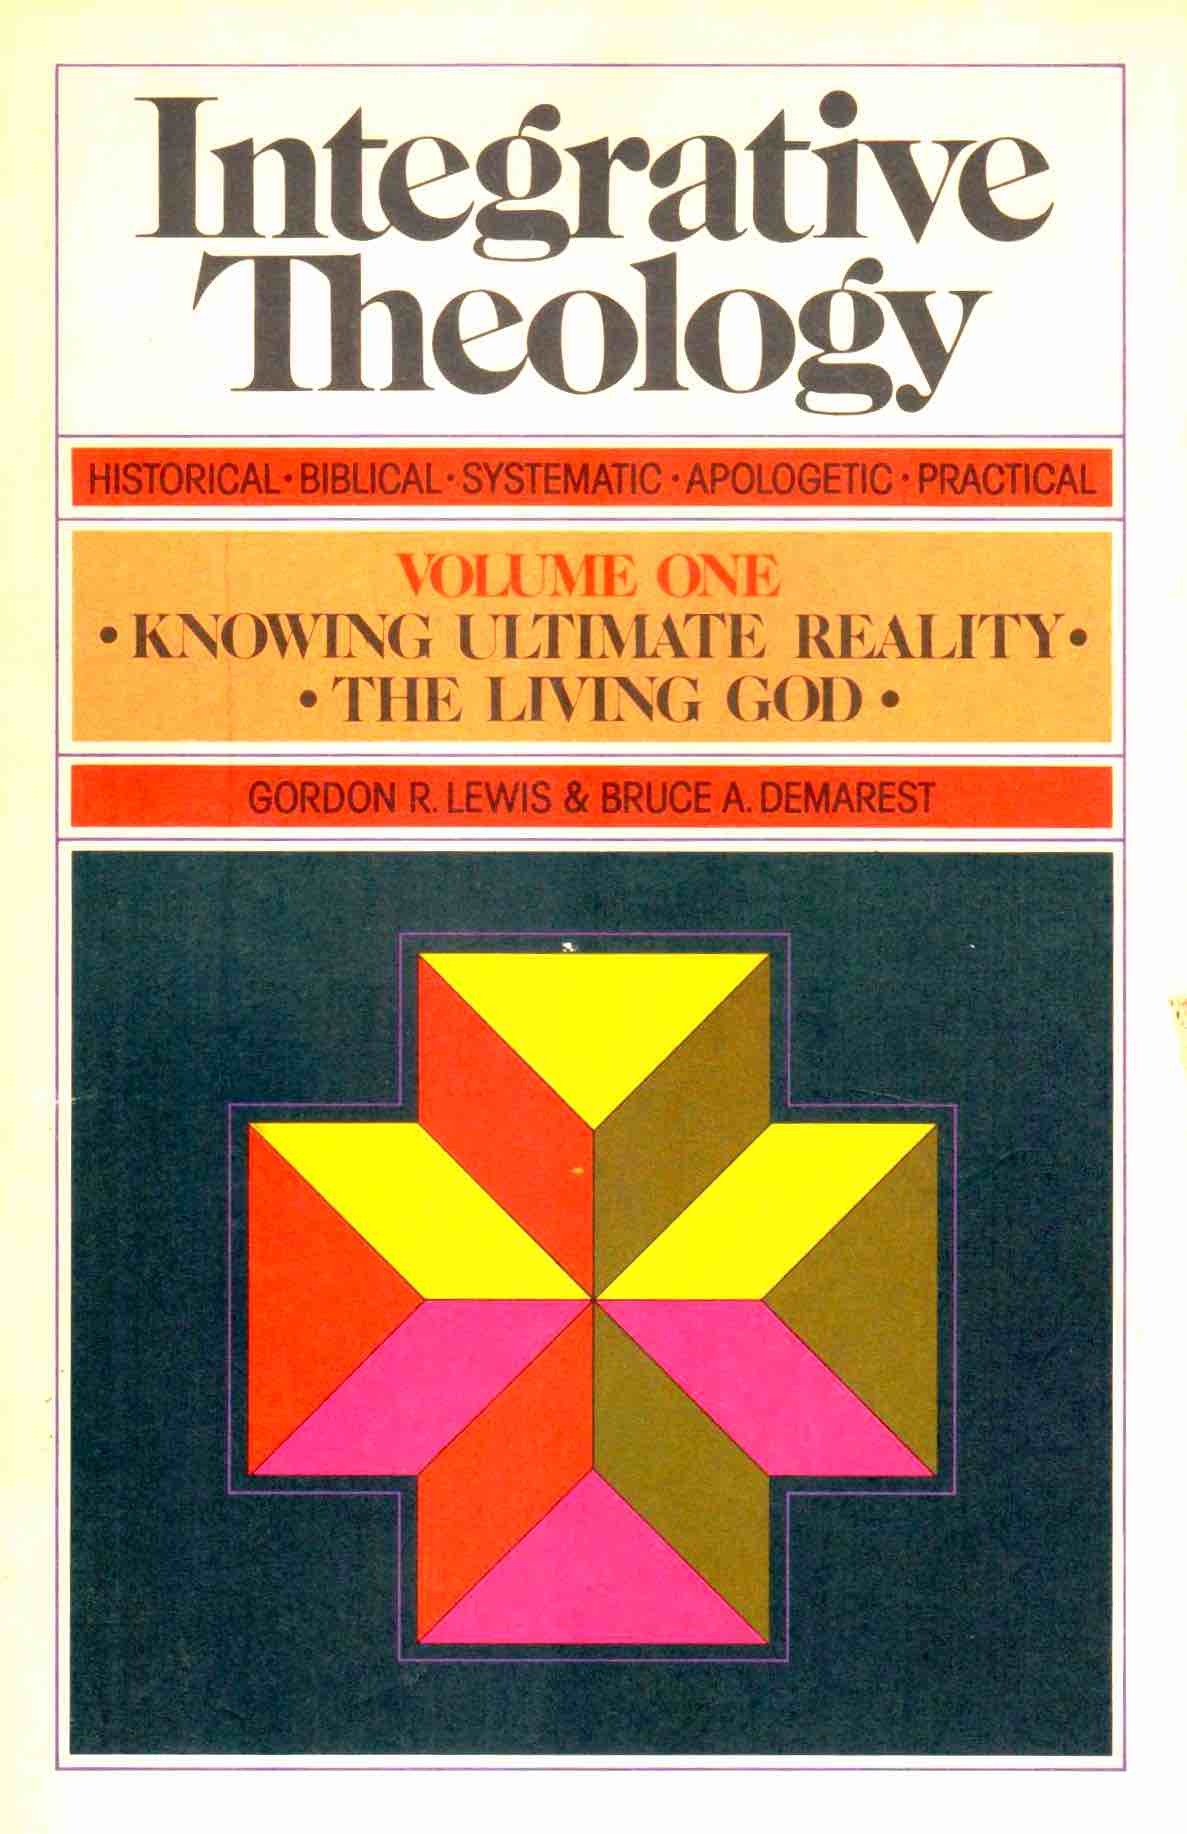 Cover of Integrative Theology Volume One